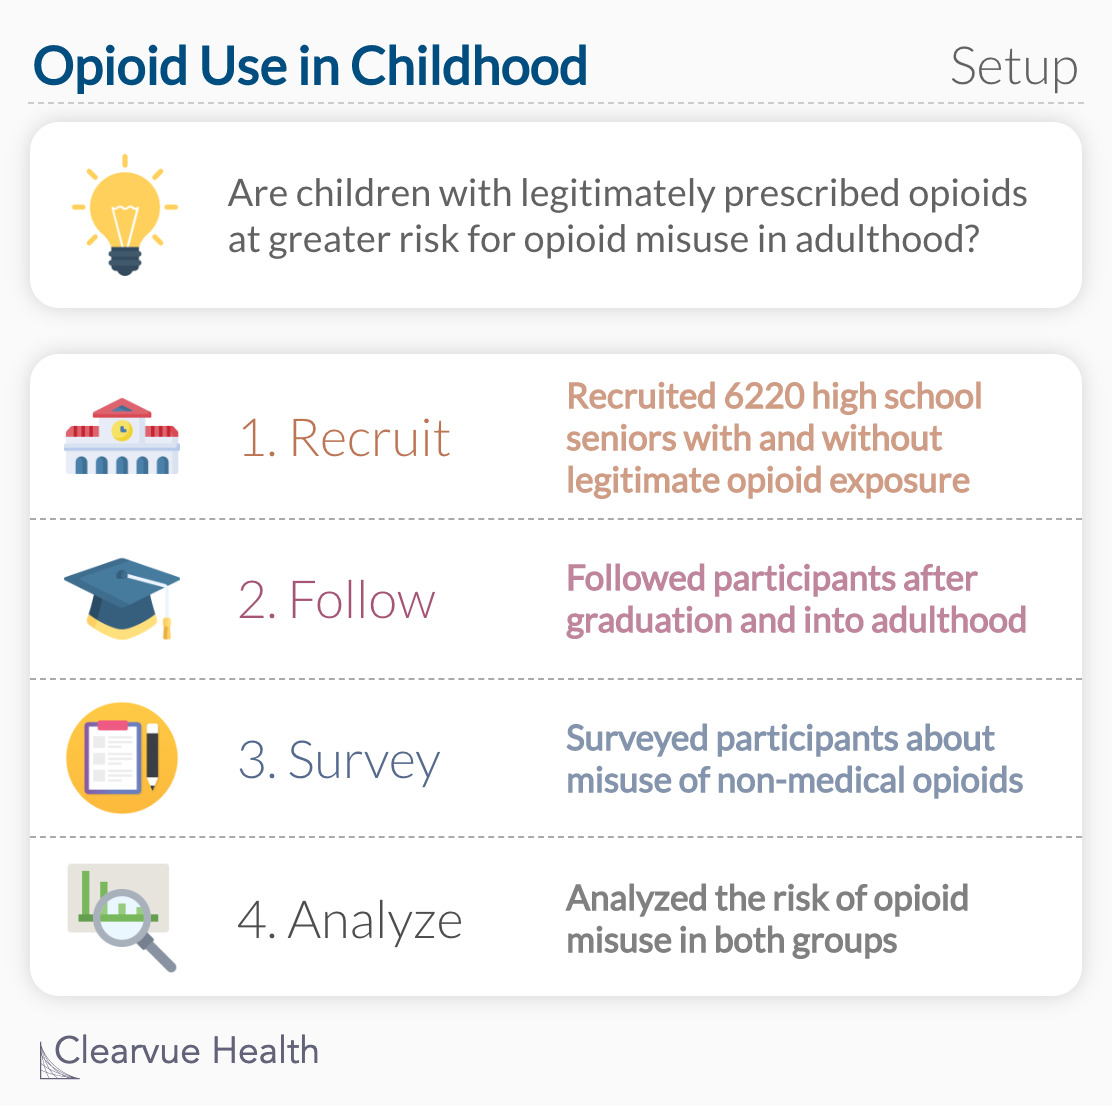 Opioid Use in Childhood